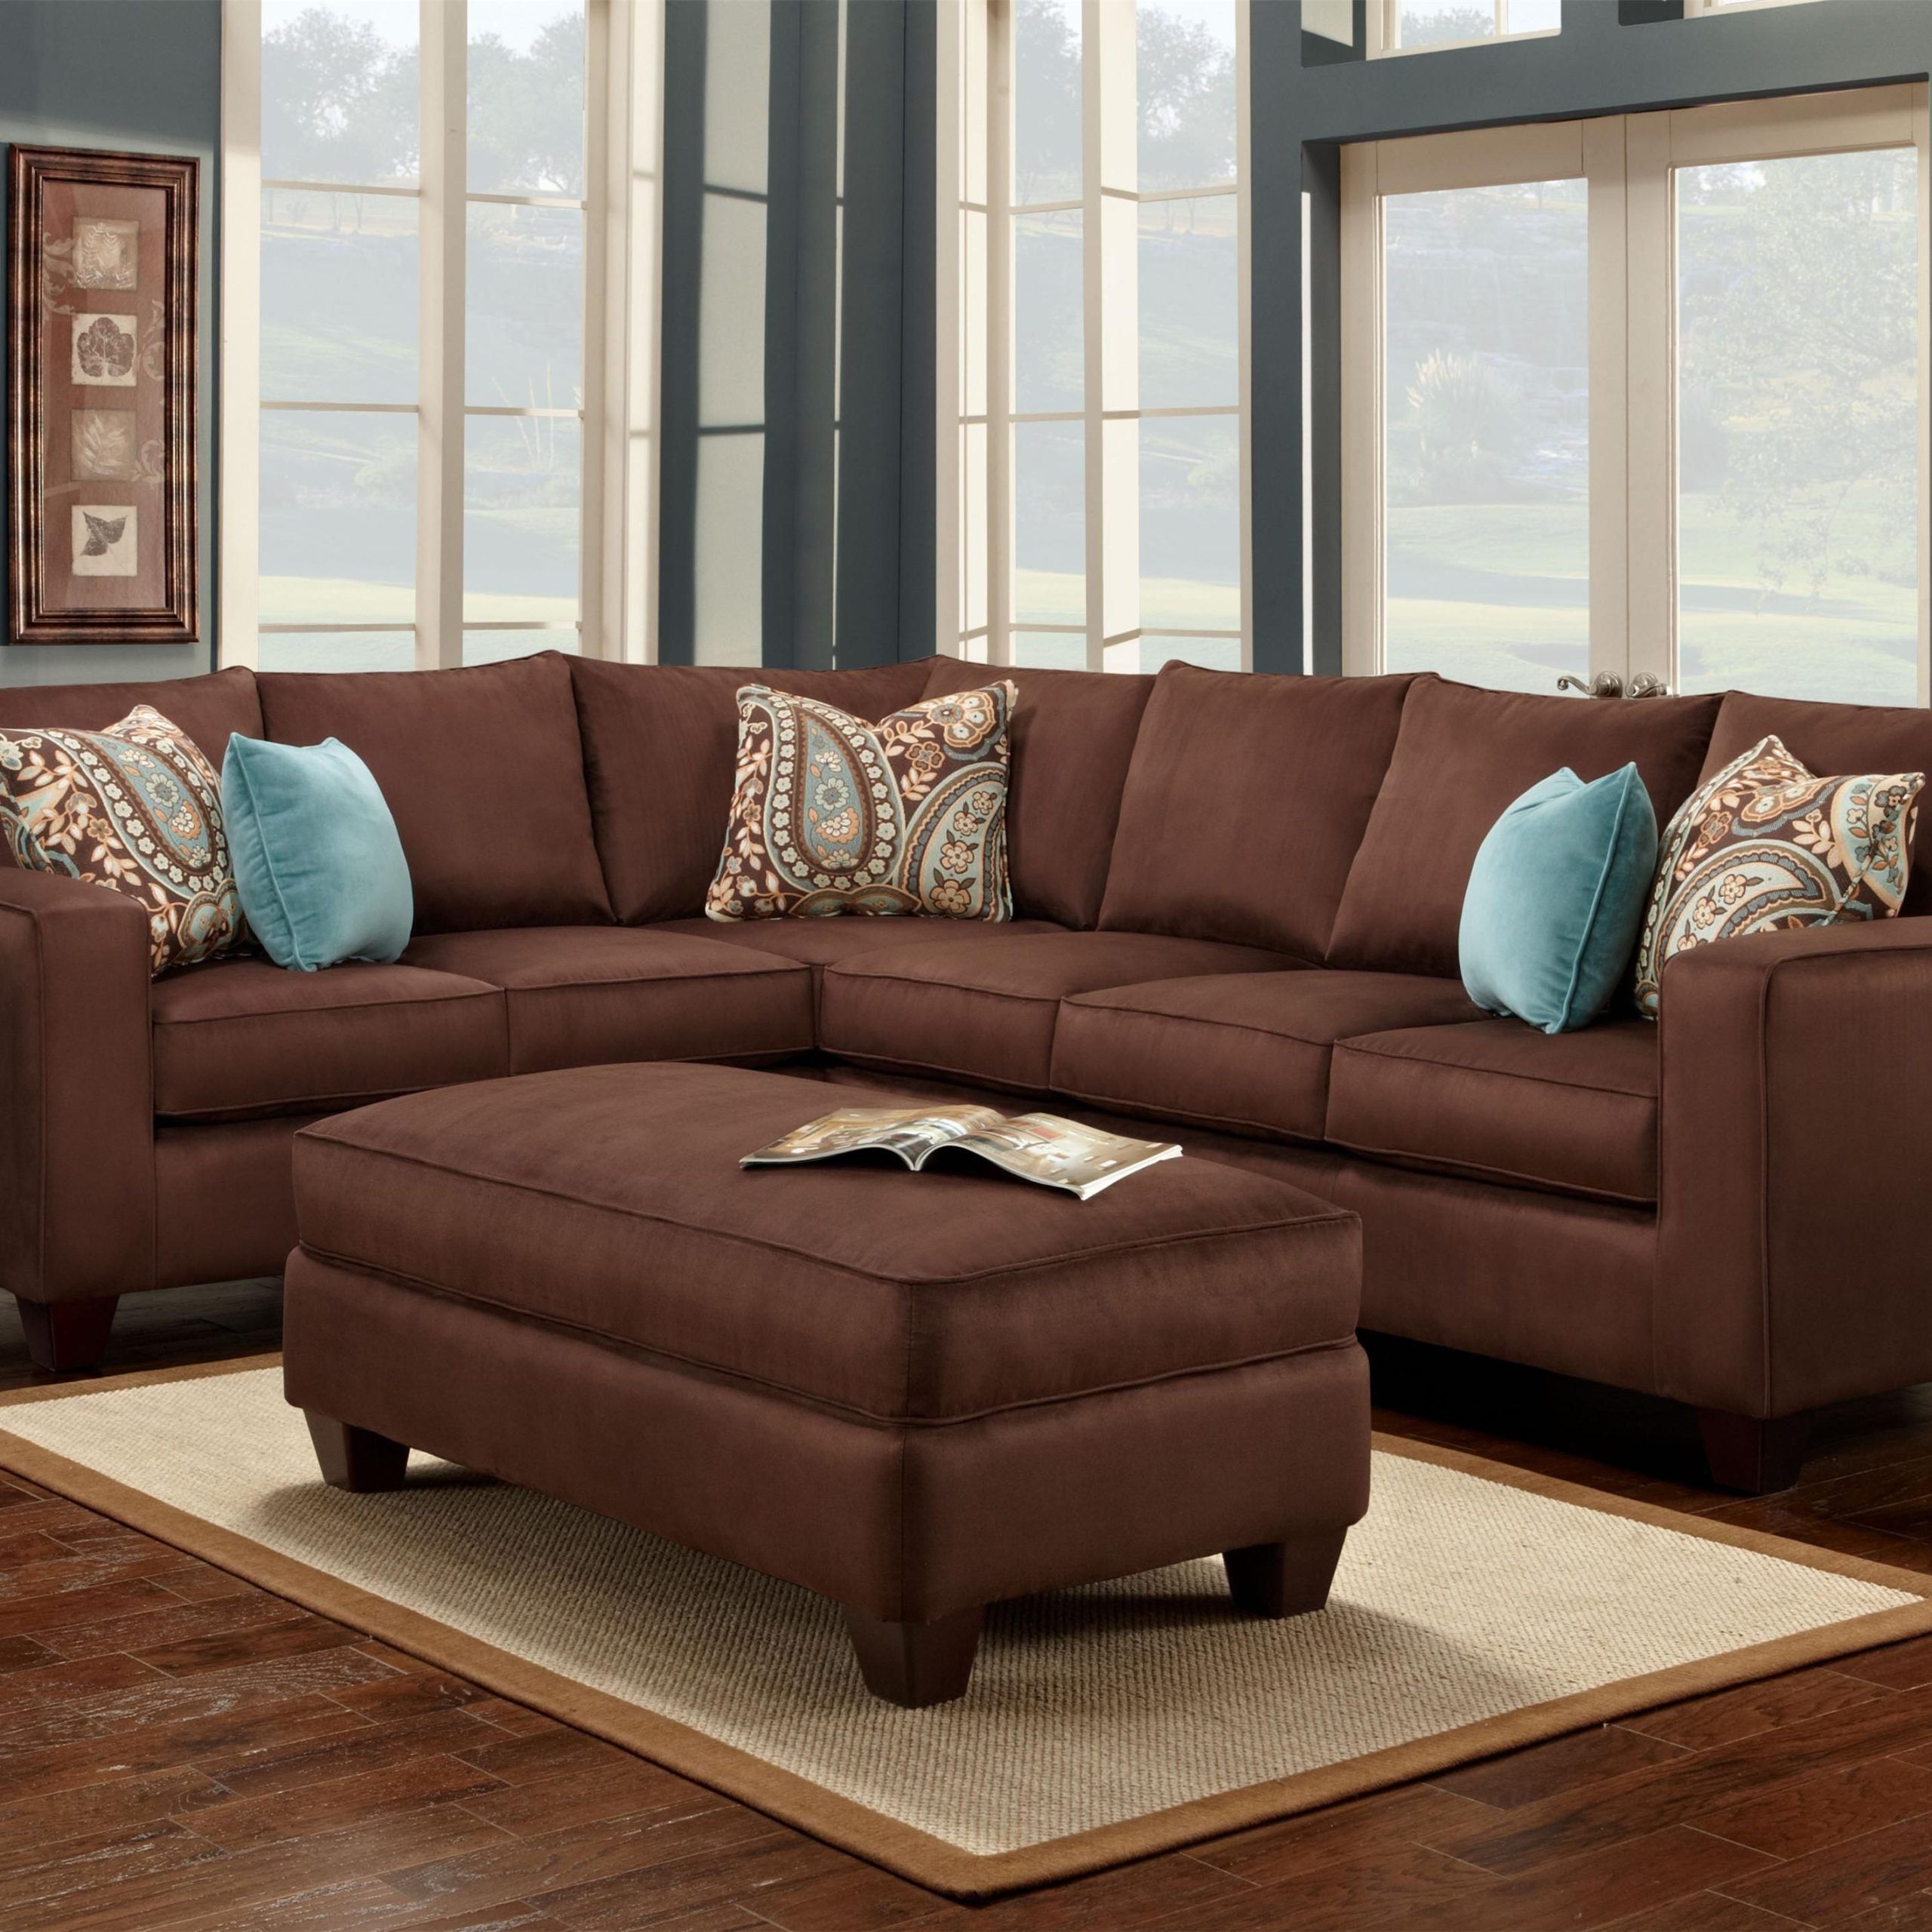 Turquoise Is A Great Accent Color To Chocolate Brown! #accent #pillows #sofa  | Brown Living Room Decor, Brown Couch Living Room, Brown Sofa Living Room With Sofas In Chocolate Brown (Photo 1 of 15)